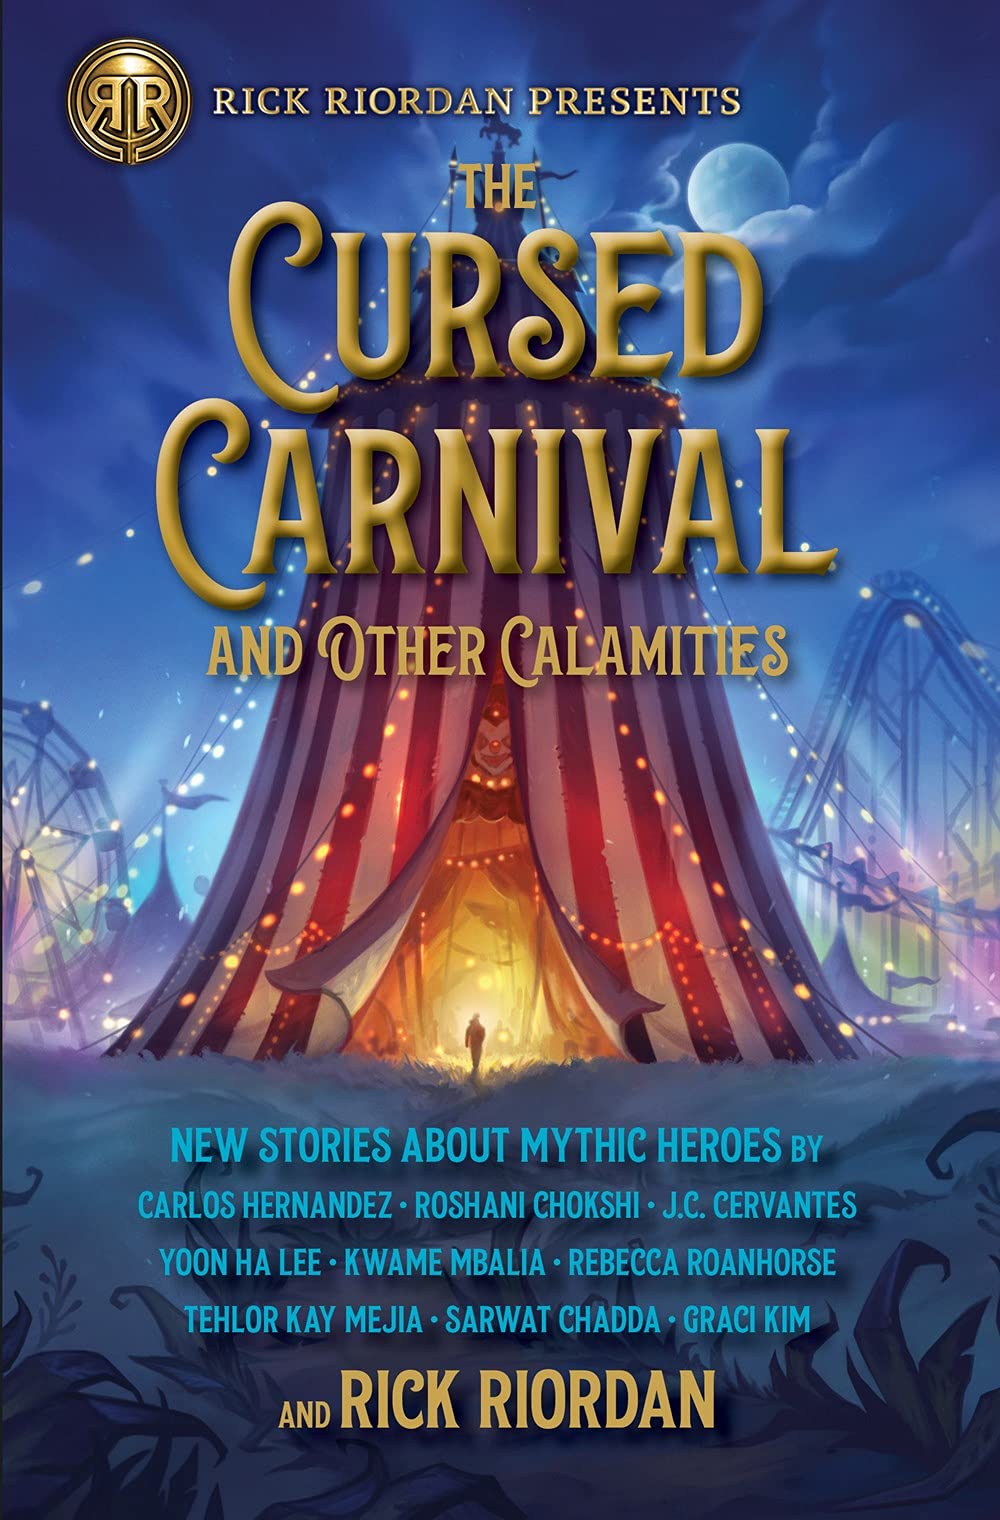 The Rick Riordan Presents: Cursed Carnival and Other Calamities: New Stories about Mythic Heroes (Hardcover)